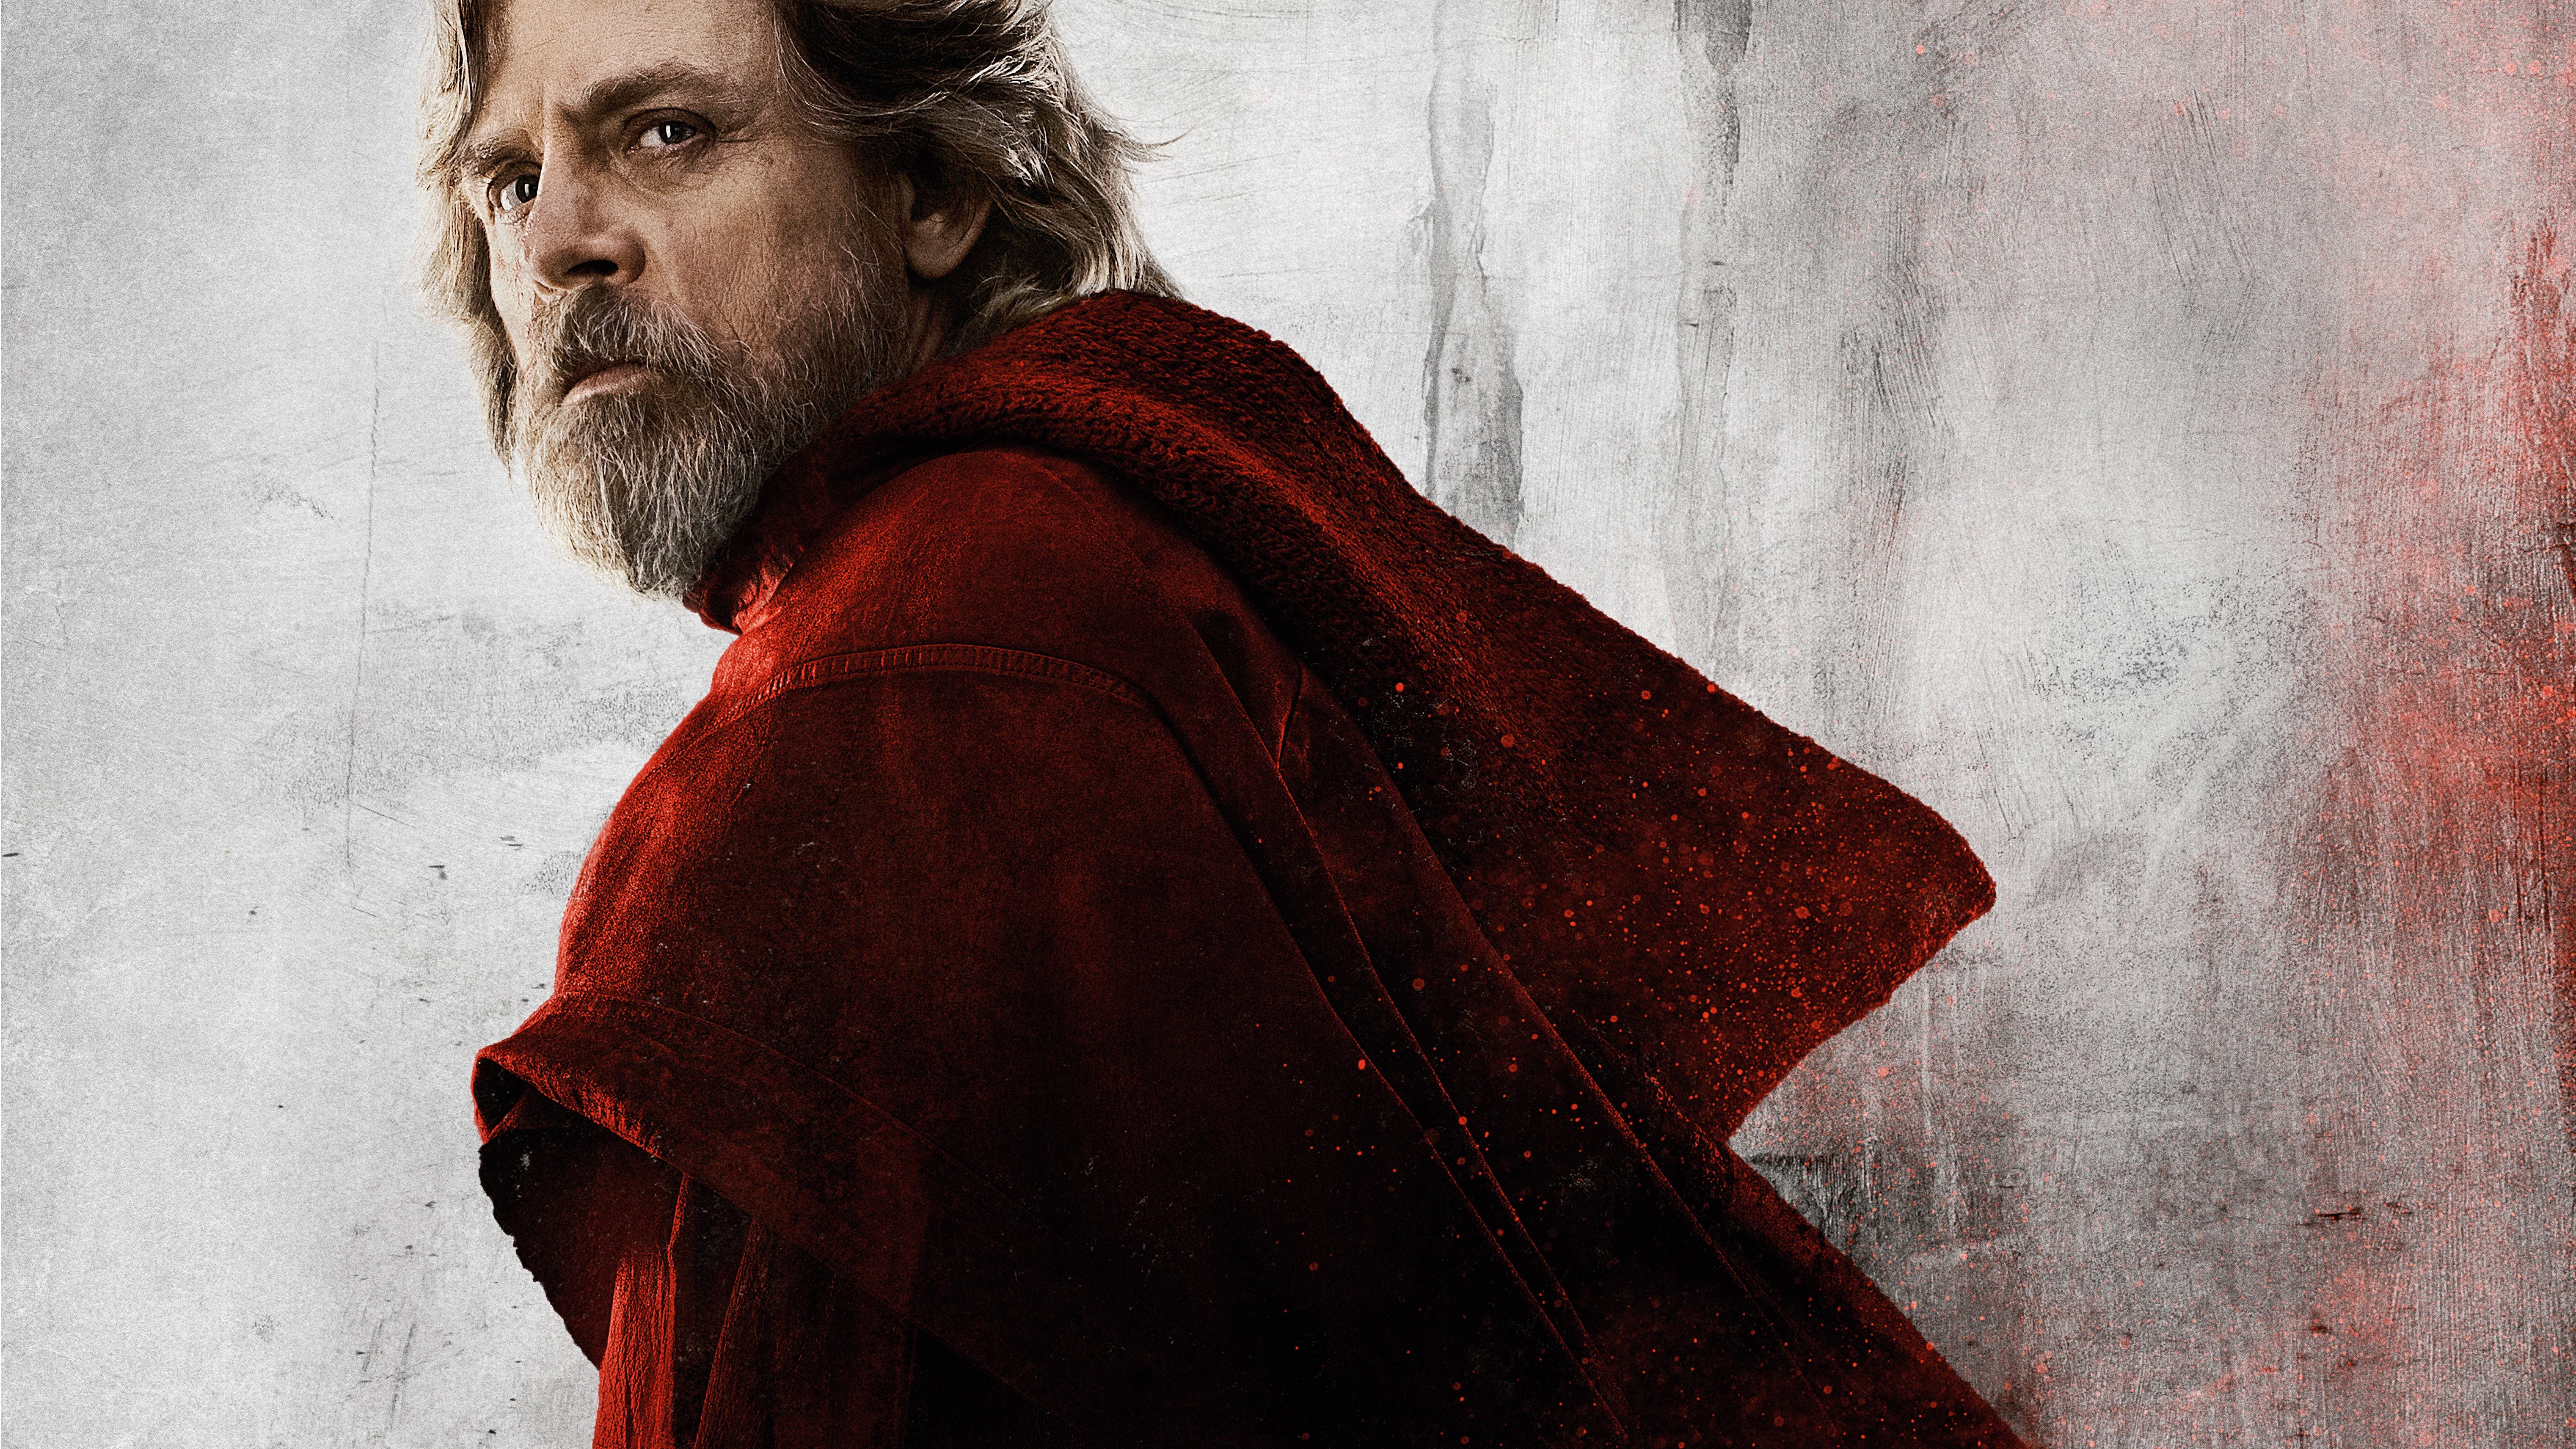 Rian Johnson defends 'hated' Star Wars: The Last Jedi scene from